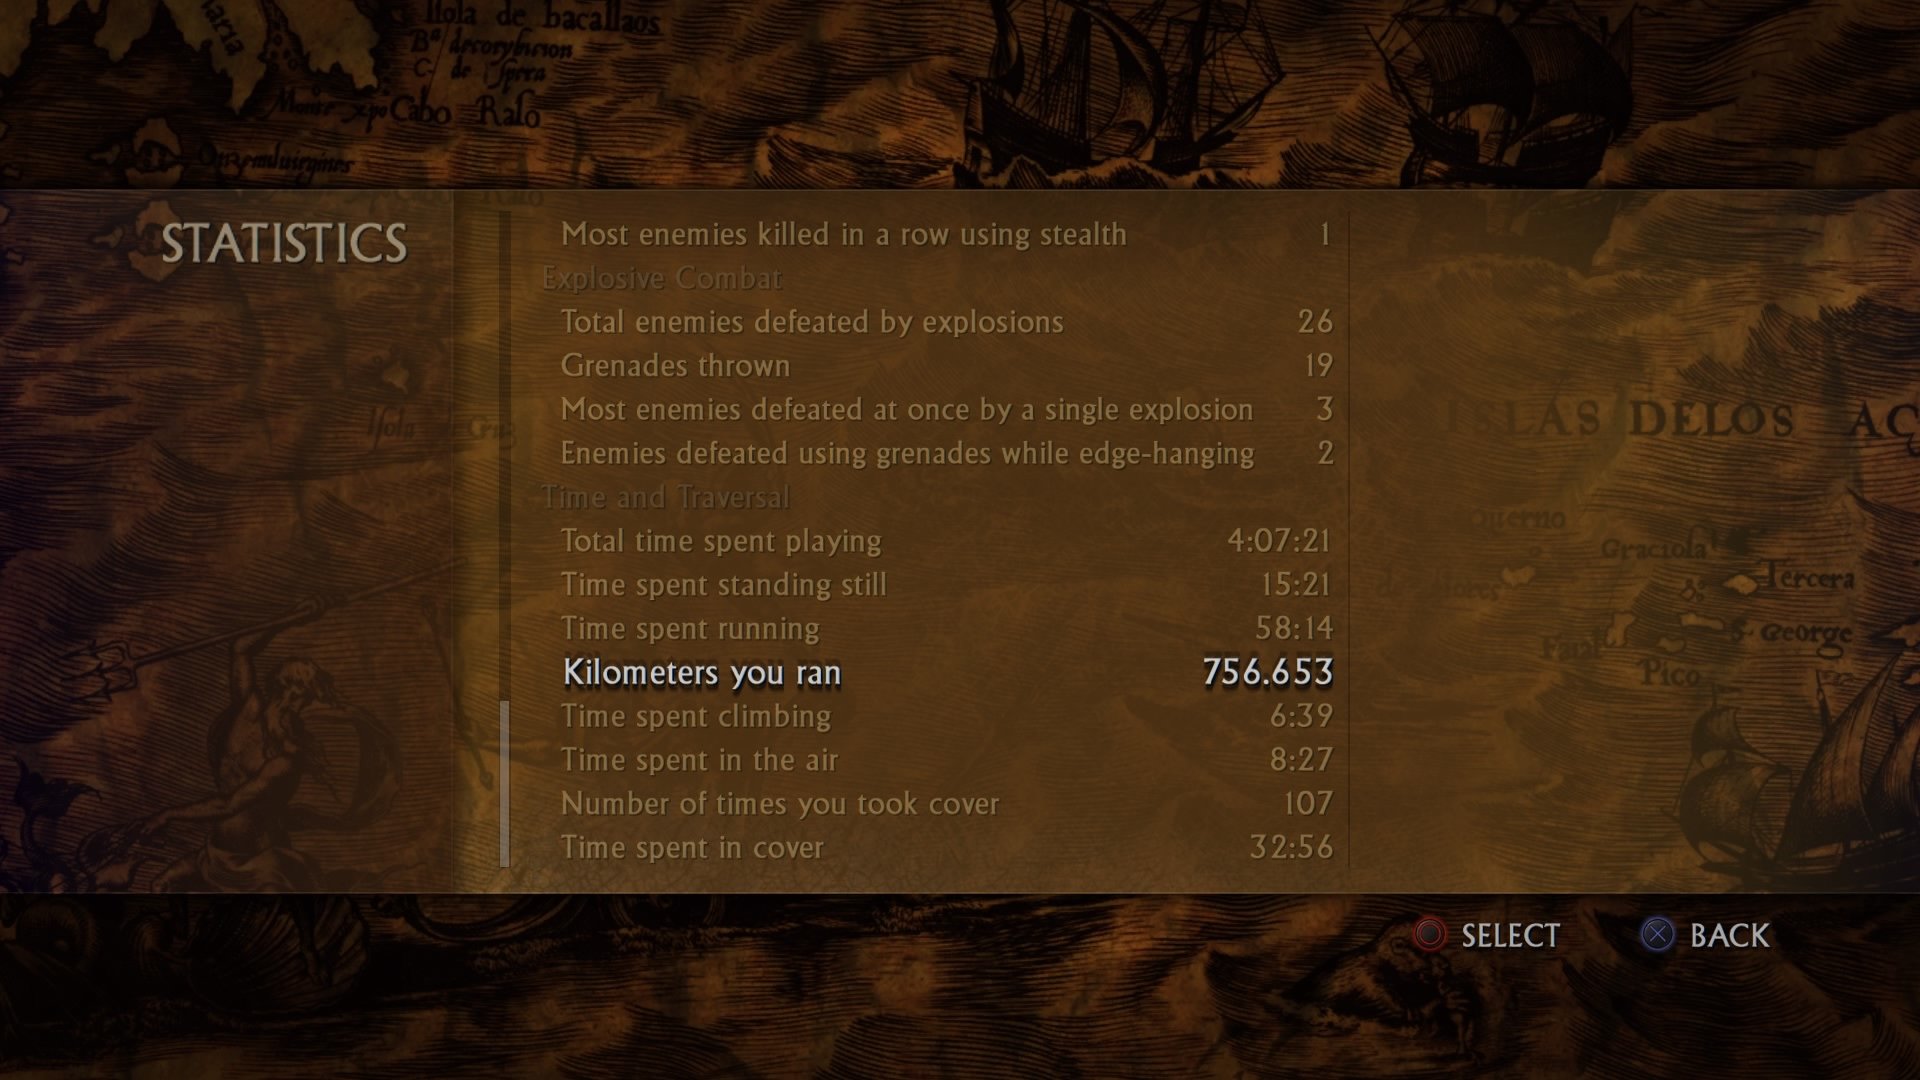 Statistics @ Uncharted: Drake's Fortune